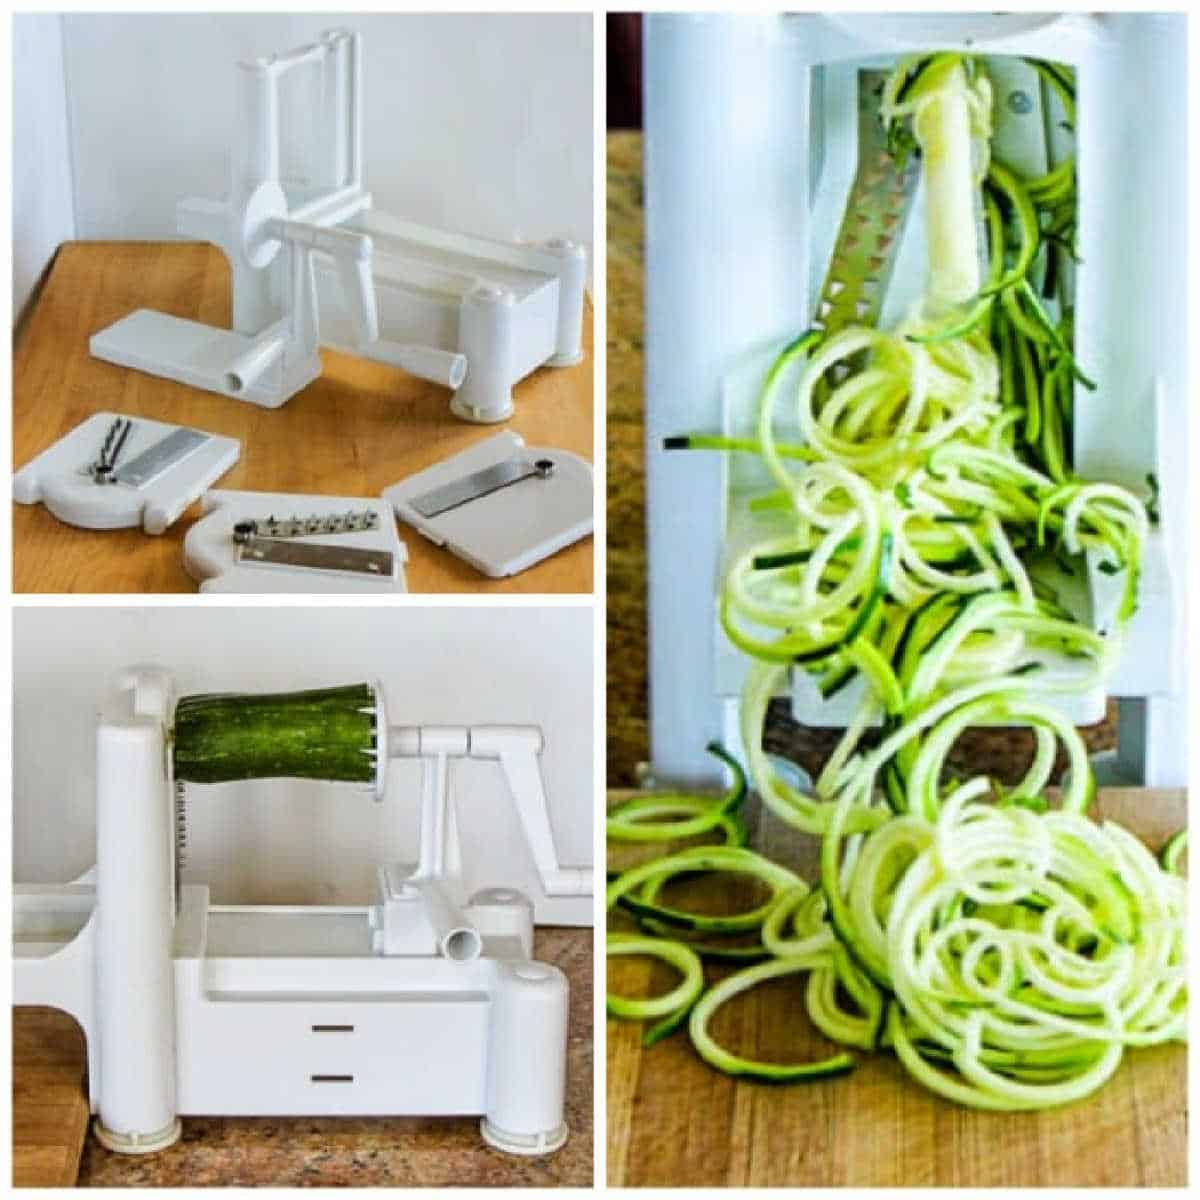 How to Make Zucchini Noodles with the Spiralizer